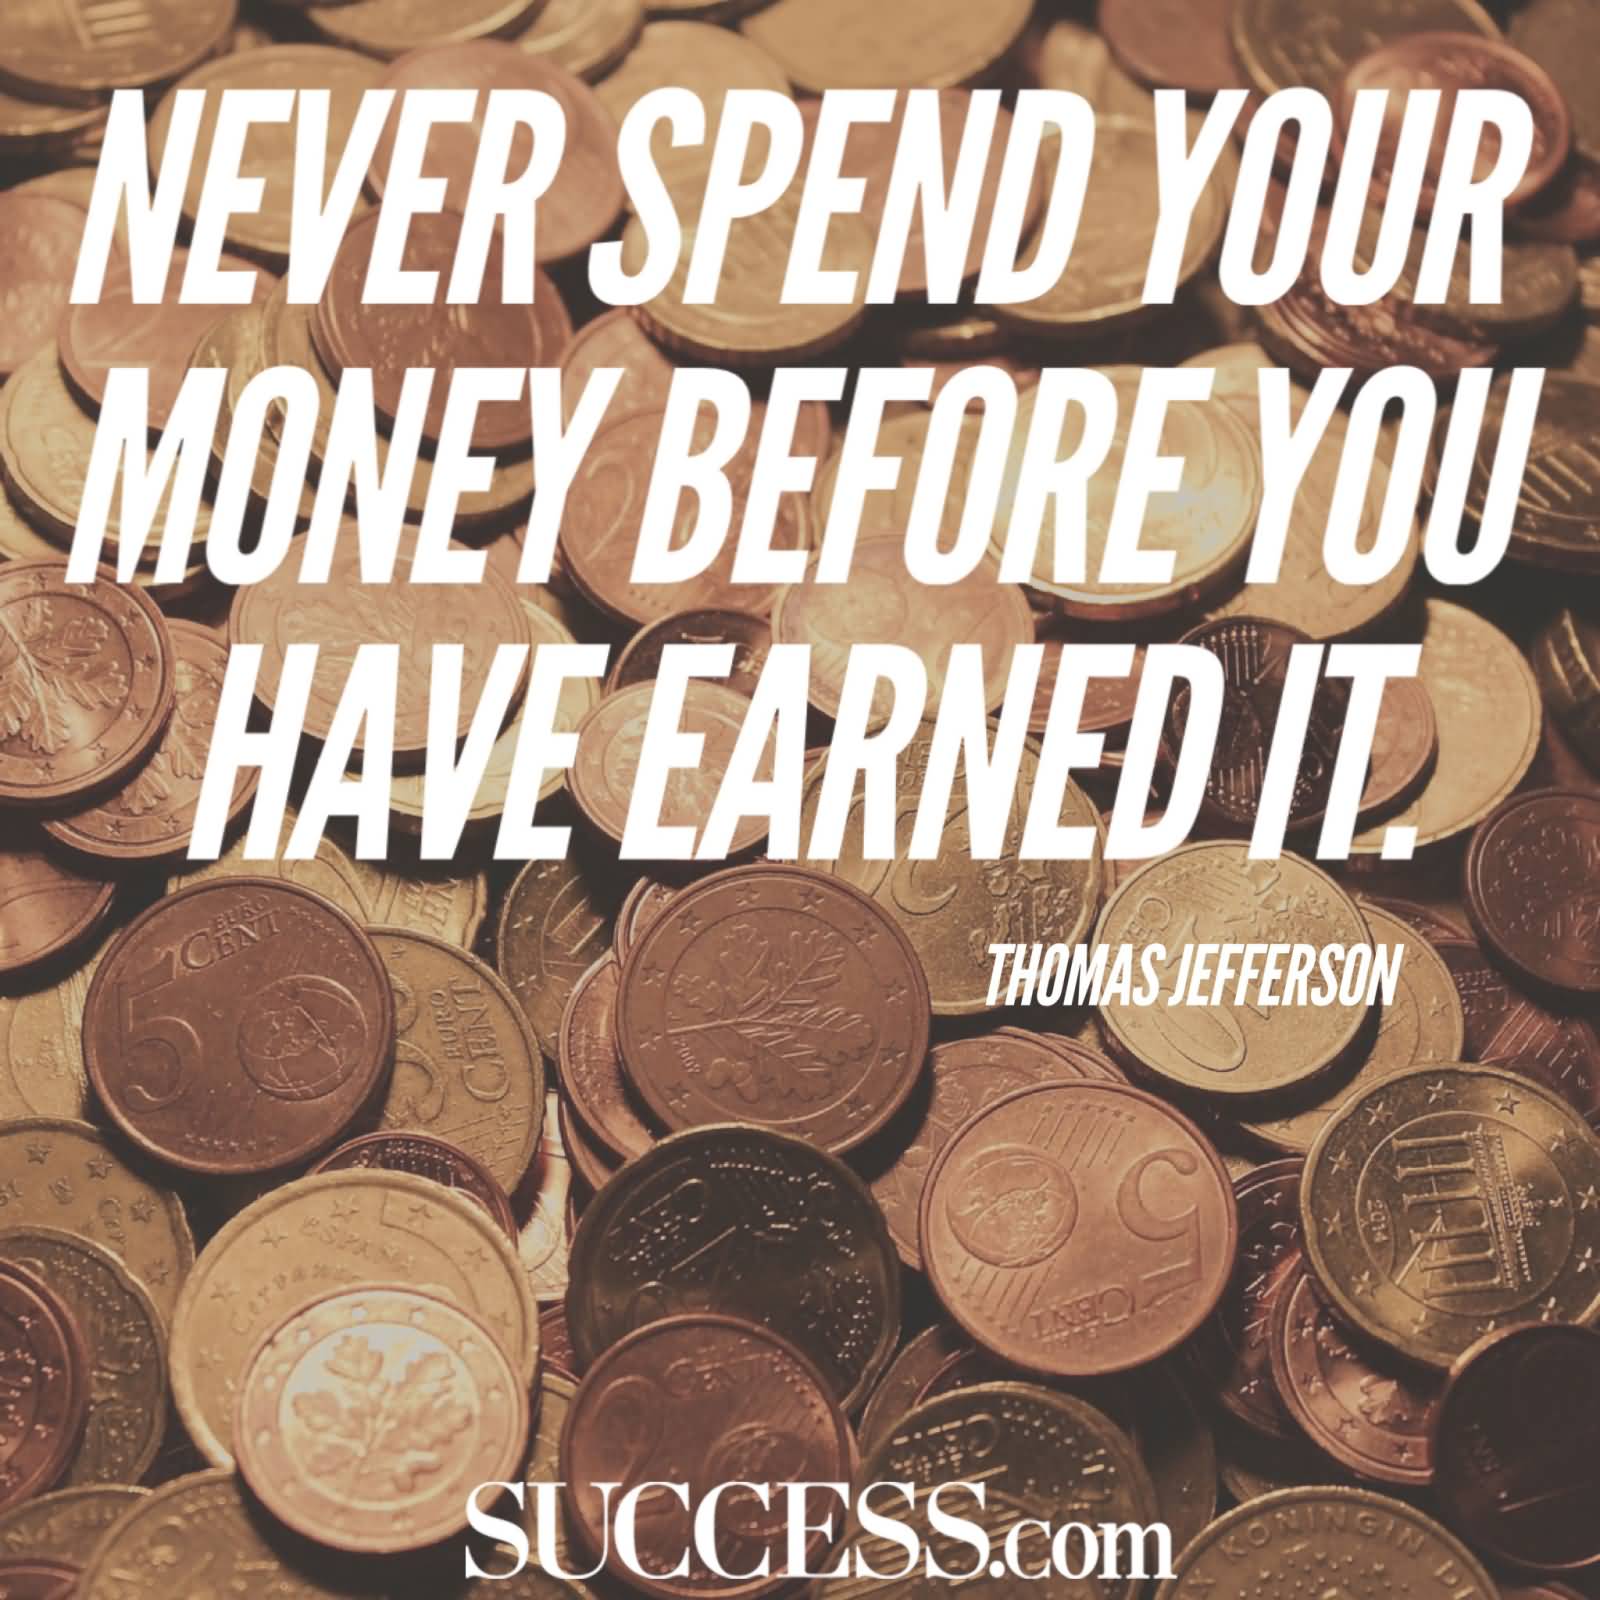 Never spend your money before you have earned it. Thomas Jefferson